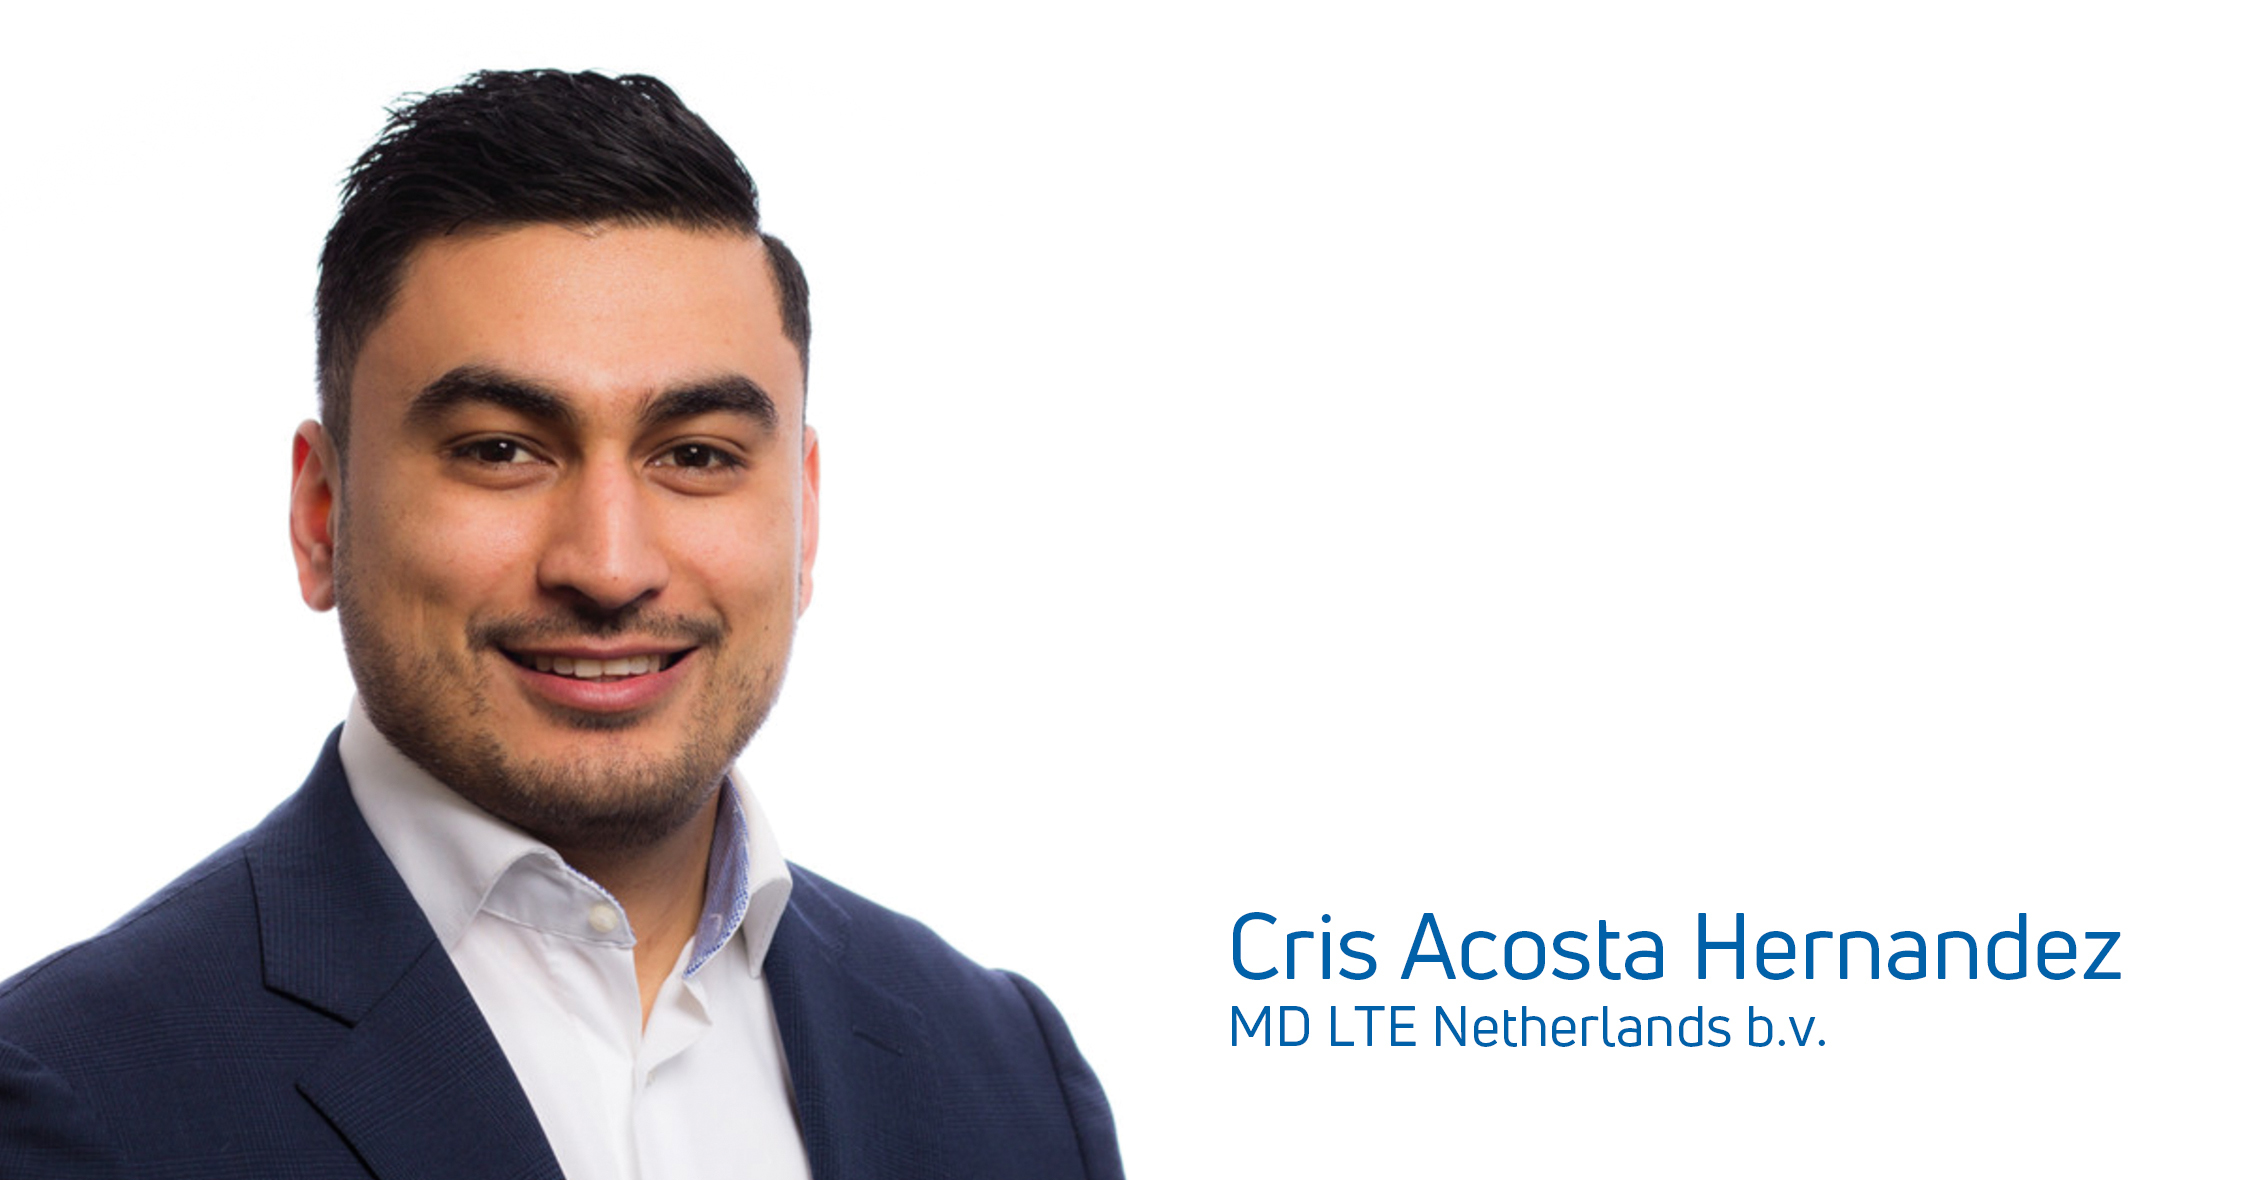 LTE NL | Welcome back Cris!